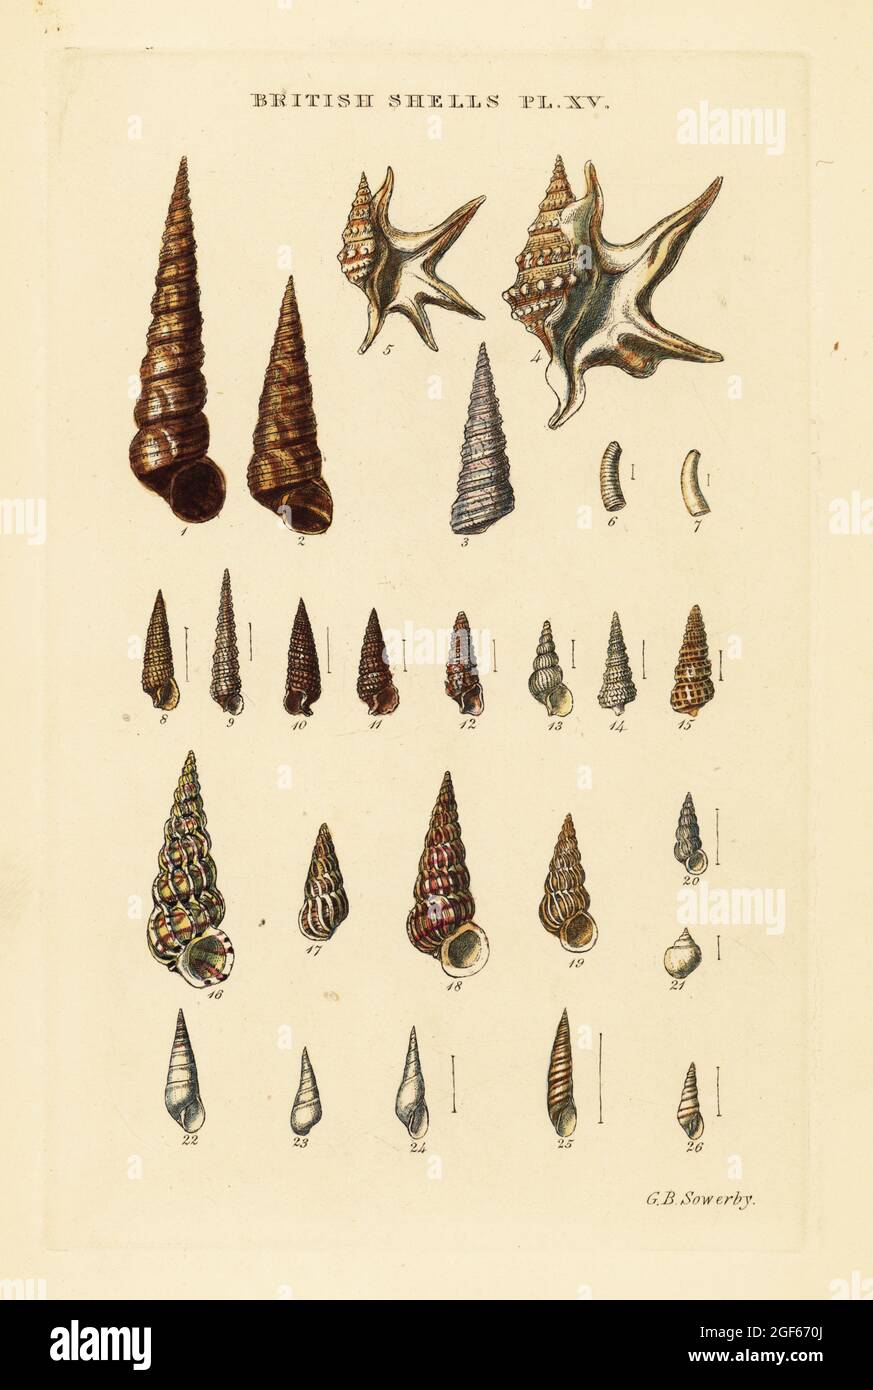 Sea snails, Turritella, pelican's foot, Aporrhais pespelecani, Cæcum, Cerithiopsis, Scalaria, Eulima, etc. Handcoloured copperplate engraving by George Brettingham Sowerby from his own Illustrated Index of British Shells, Sowerby and Simpkin, Marshall & Co., London, 1859. George Brettingham Sowerby II (1812-1884), British naturalist, illustrator, and conchologist. Stock Photo